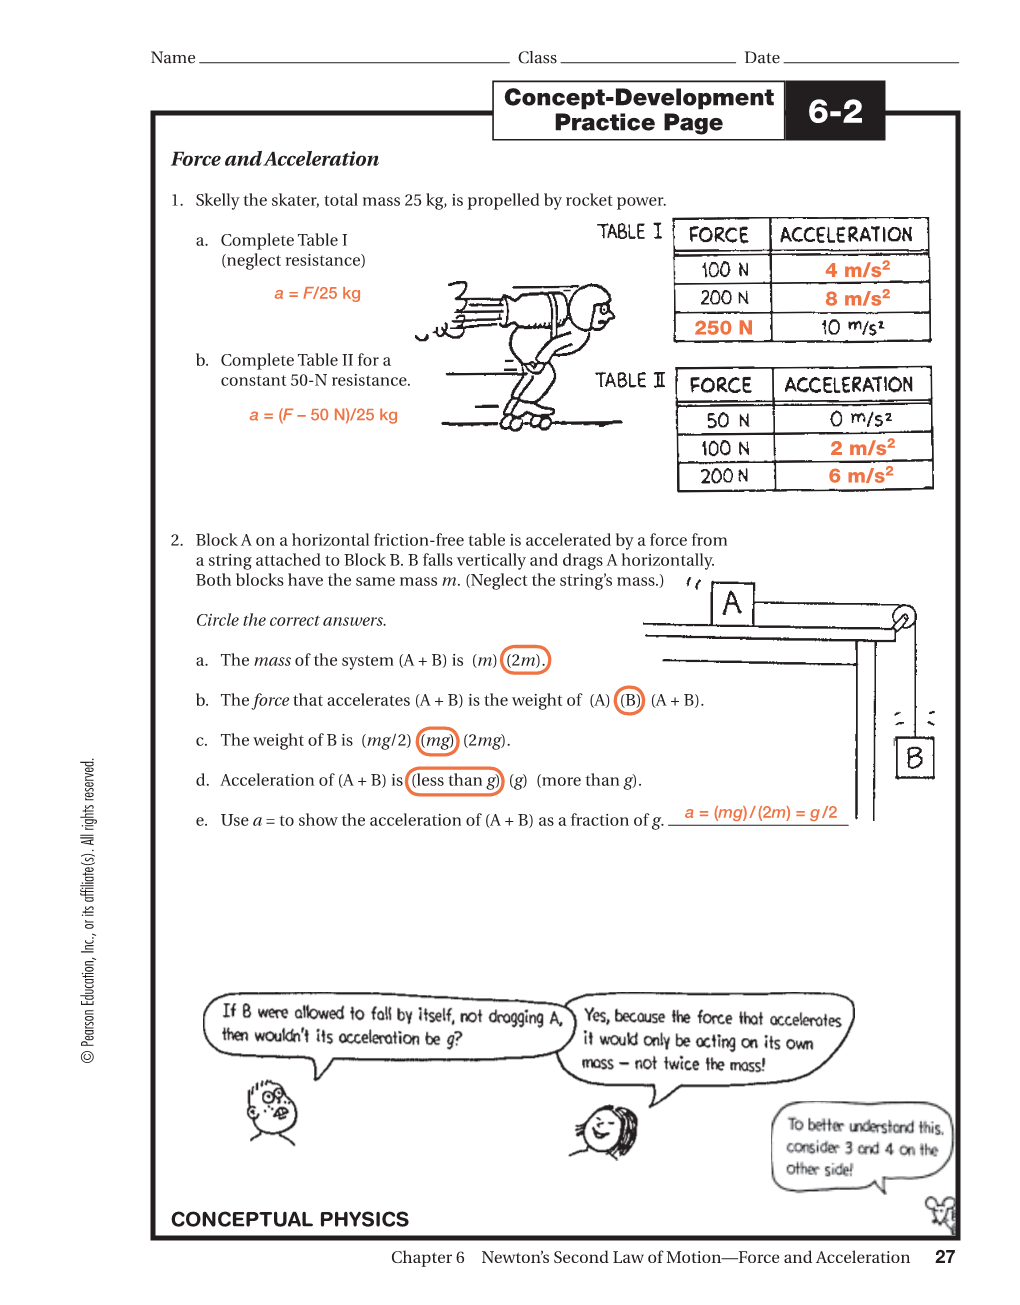 Concept-Development Practice Page 6-2 Force and Acceleration